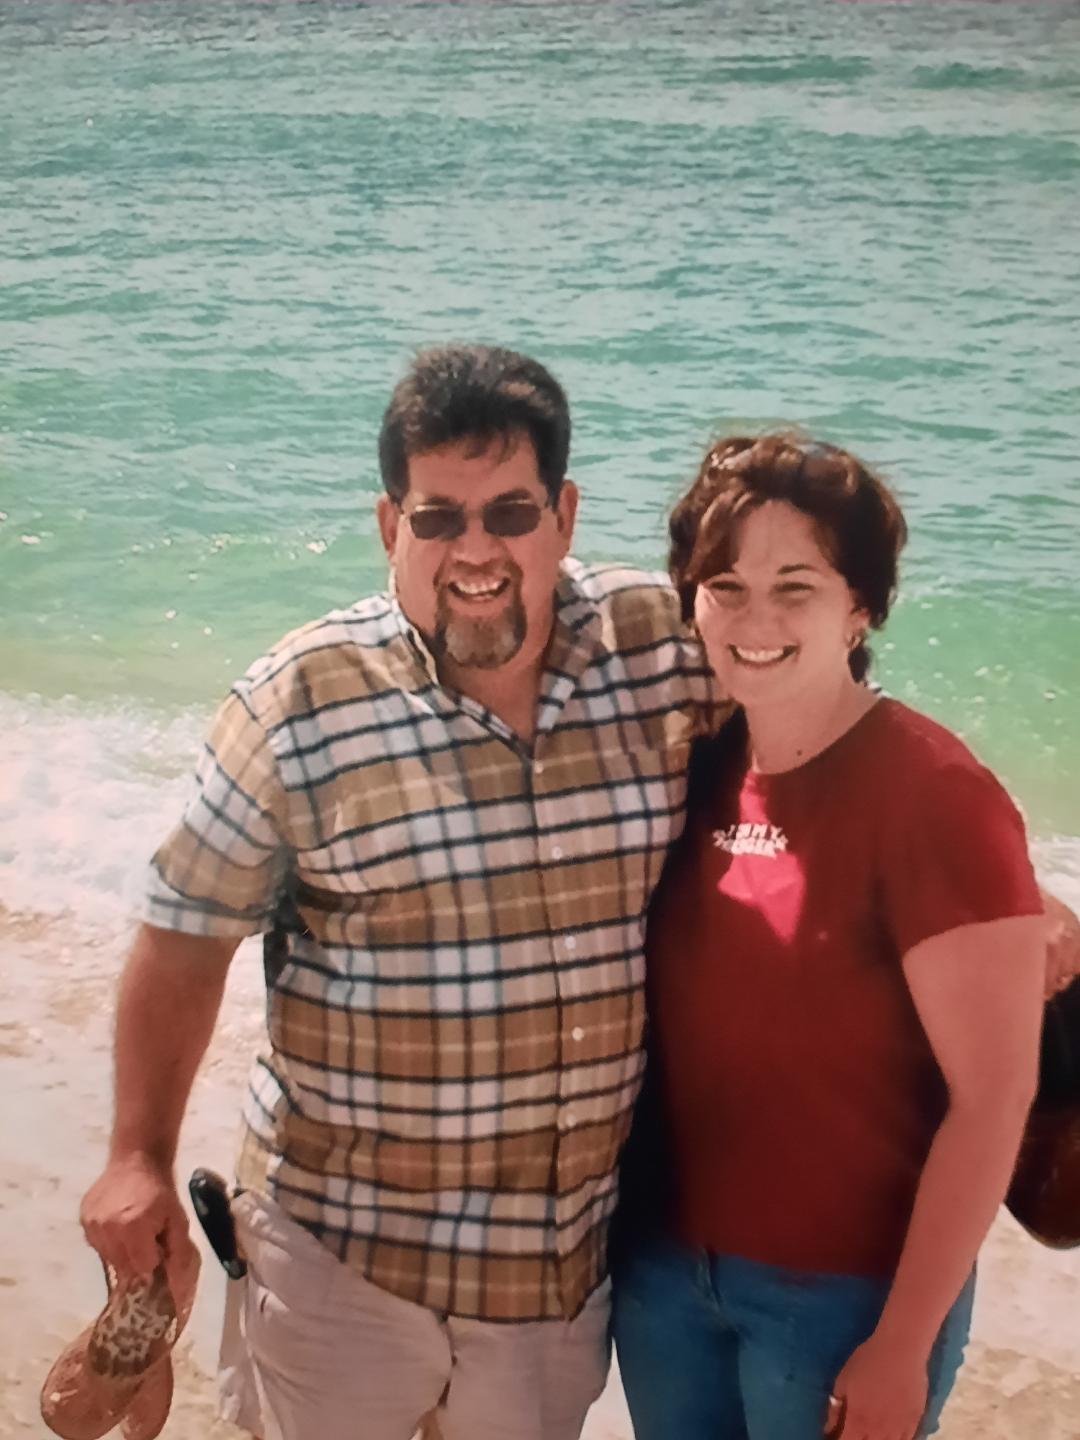 A pic of dad with his youngest daughter in florida for her 30th birthday ♡